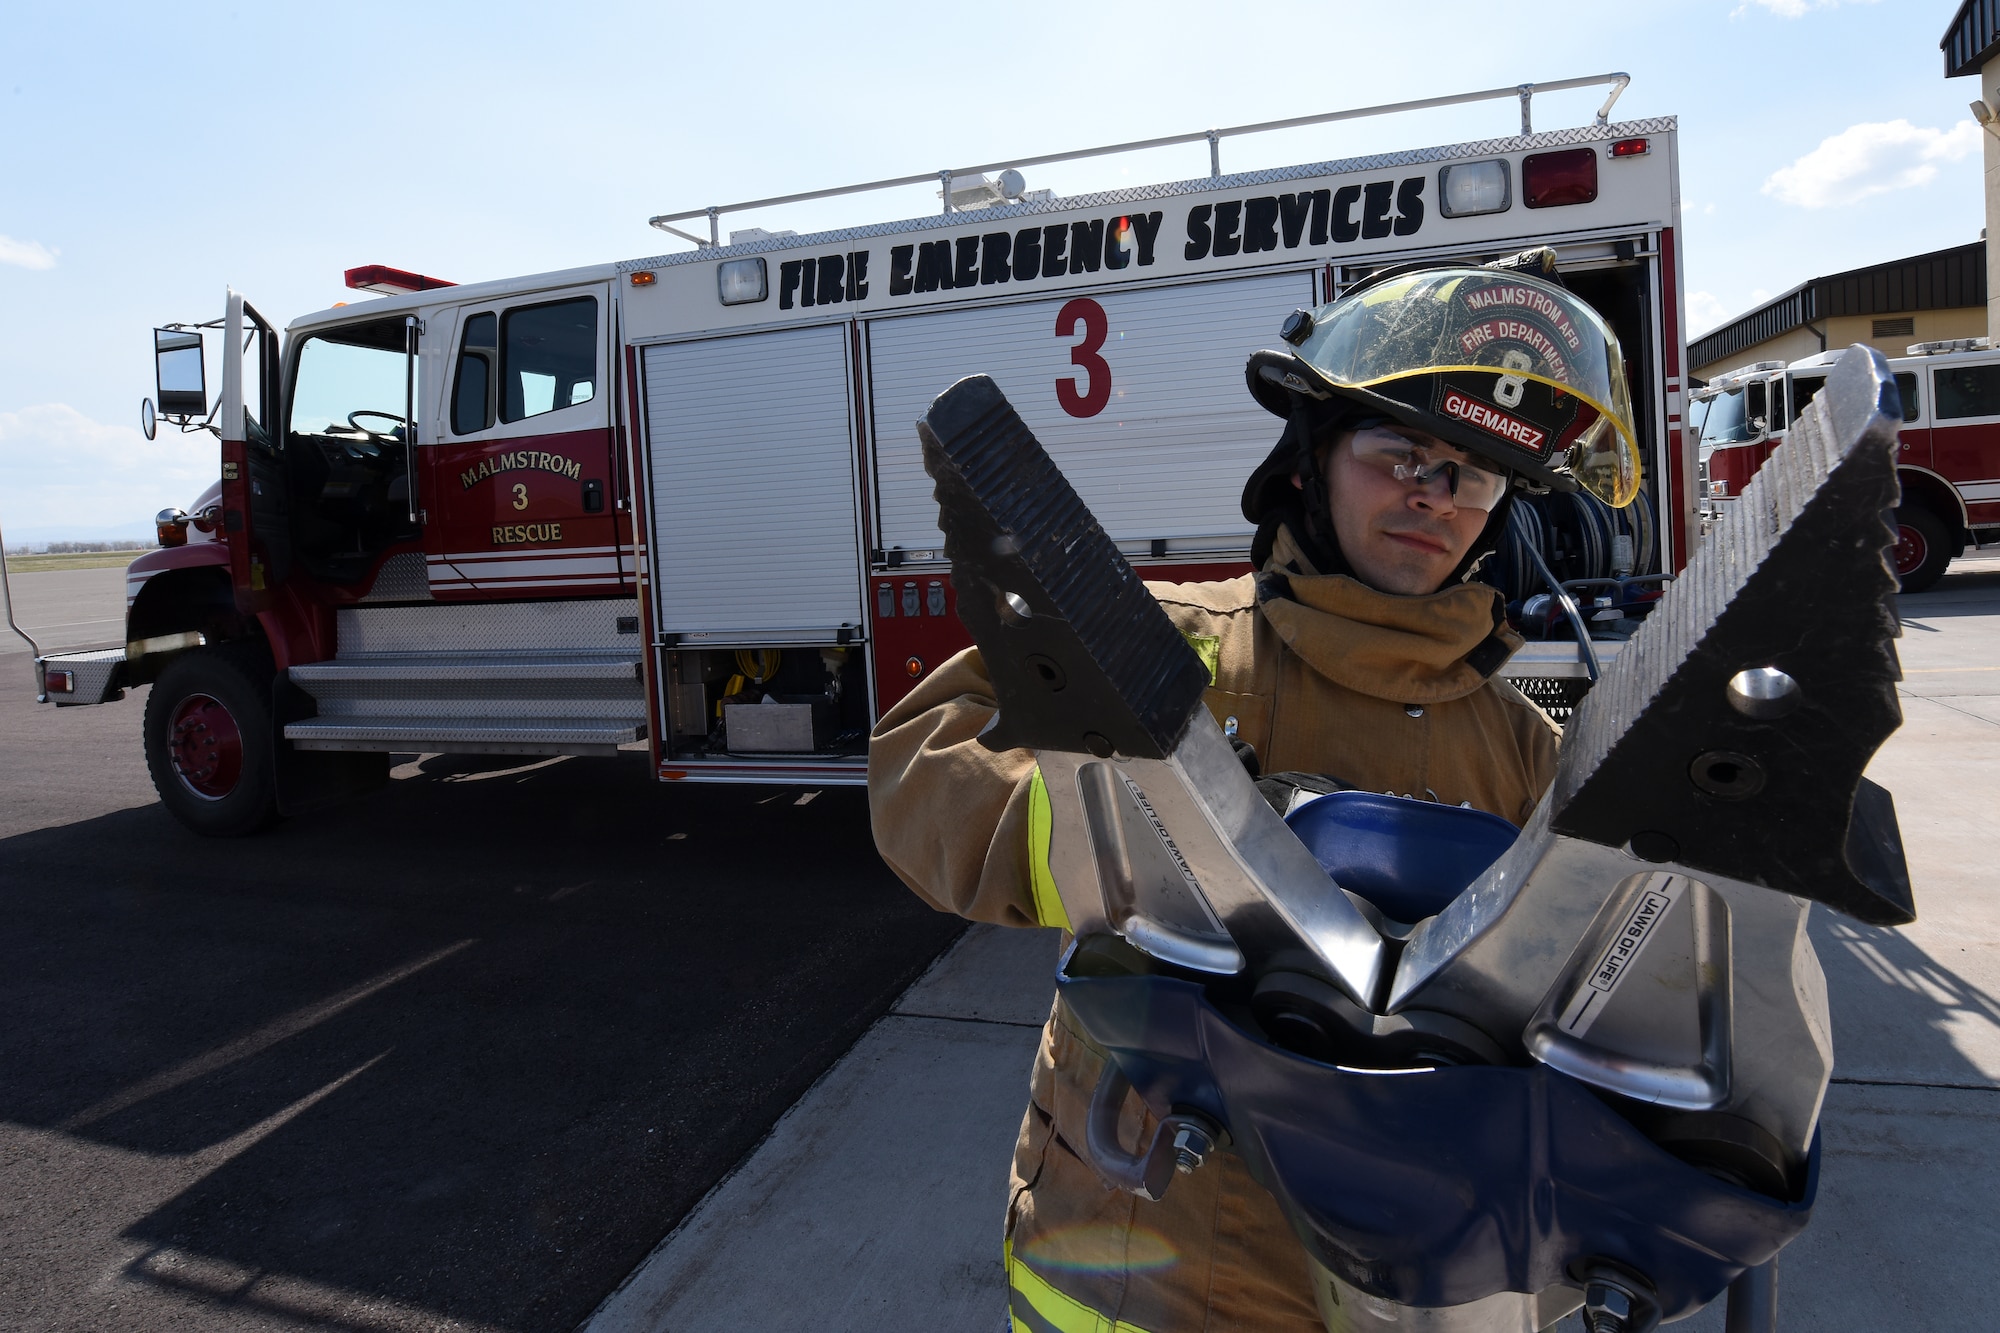 Senior Airman Hector Guemarezcolon, 341st Civil Engineer Squadron firefighter, prepares to accomplish morning checkout on rescue-truck equipment April 22, 2015, at Malmstrom Air Force Base, Mont. Crews at the Malmstrom Fire Department operate on 24-hour shifts and must be in full gear and out the door within 60 seconds from the moment an alarm sounds. (U.S. Air Force photo/Chris Willis)